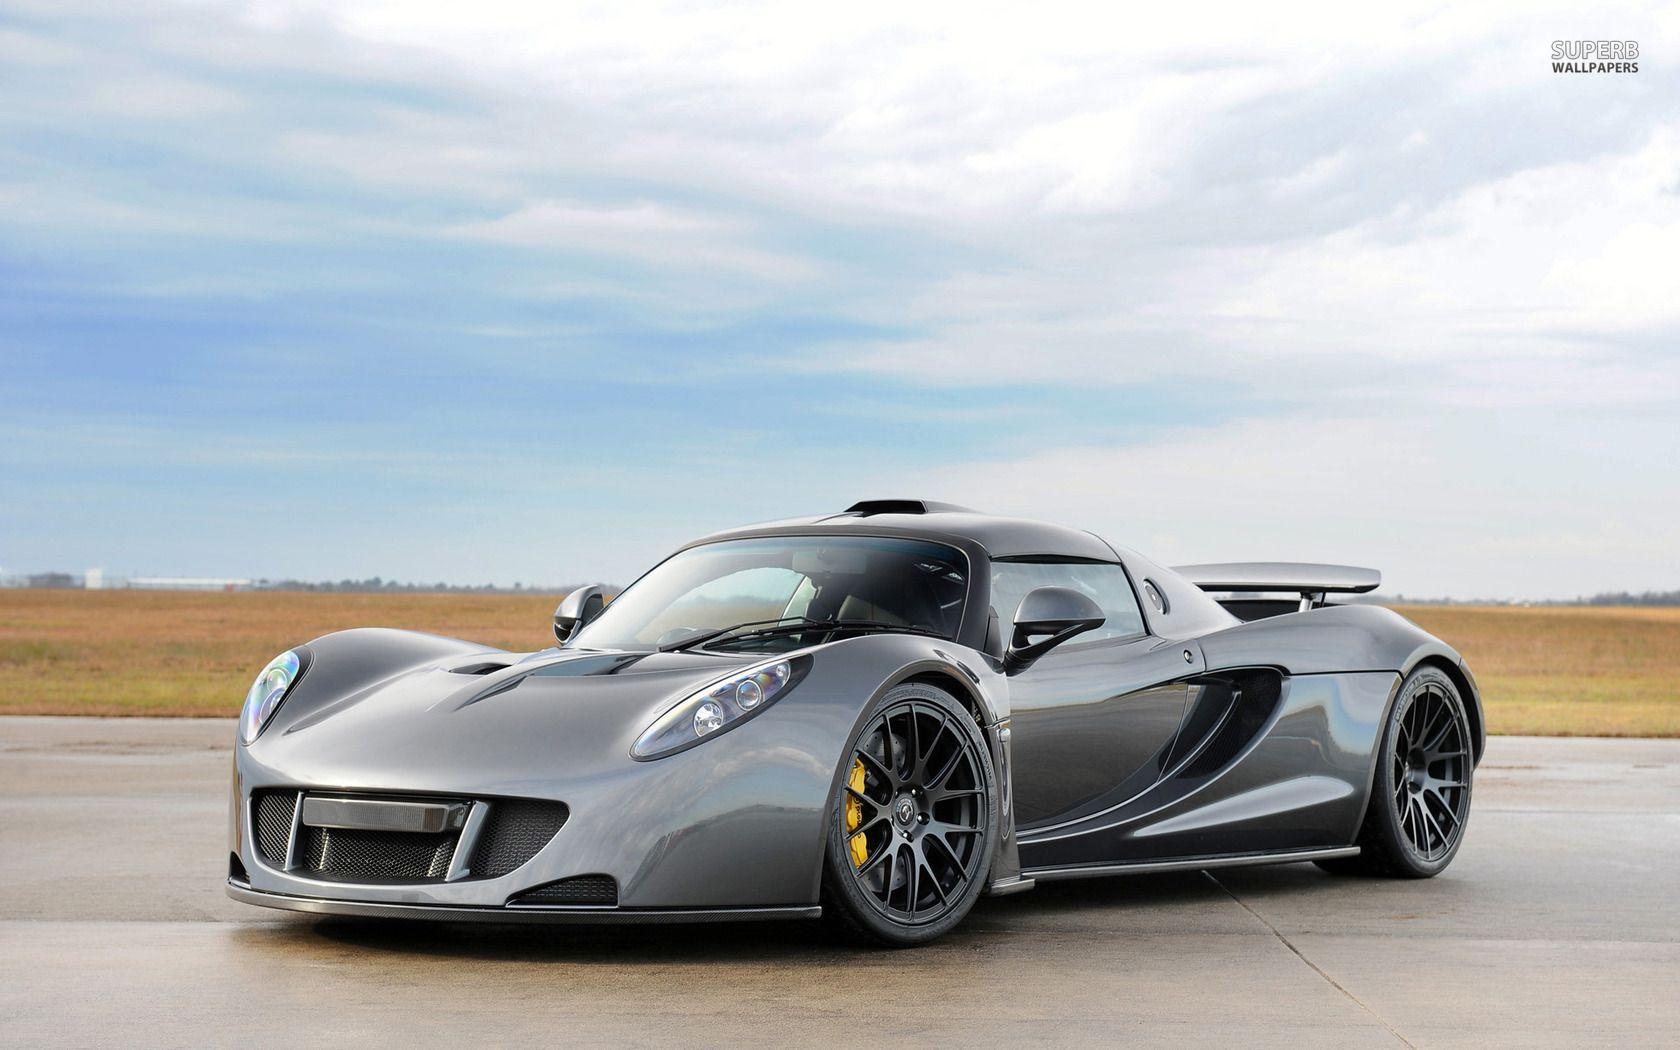 High Quality Hennessey Venom GT Picture. World's Greatest Art Site